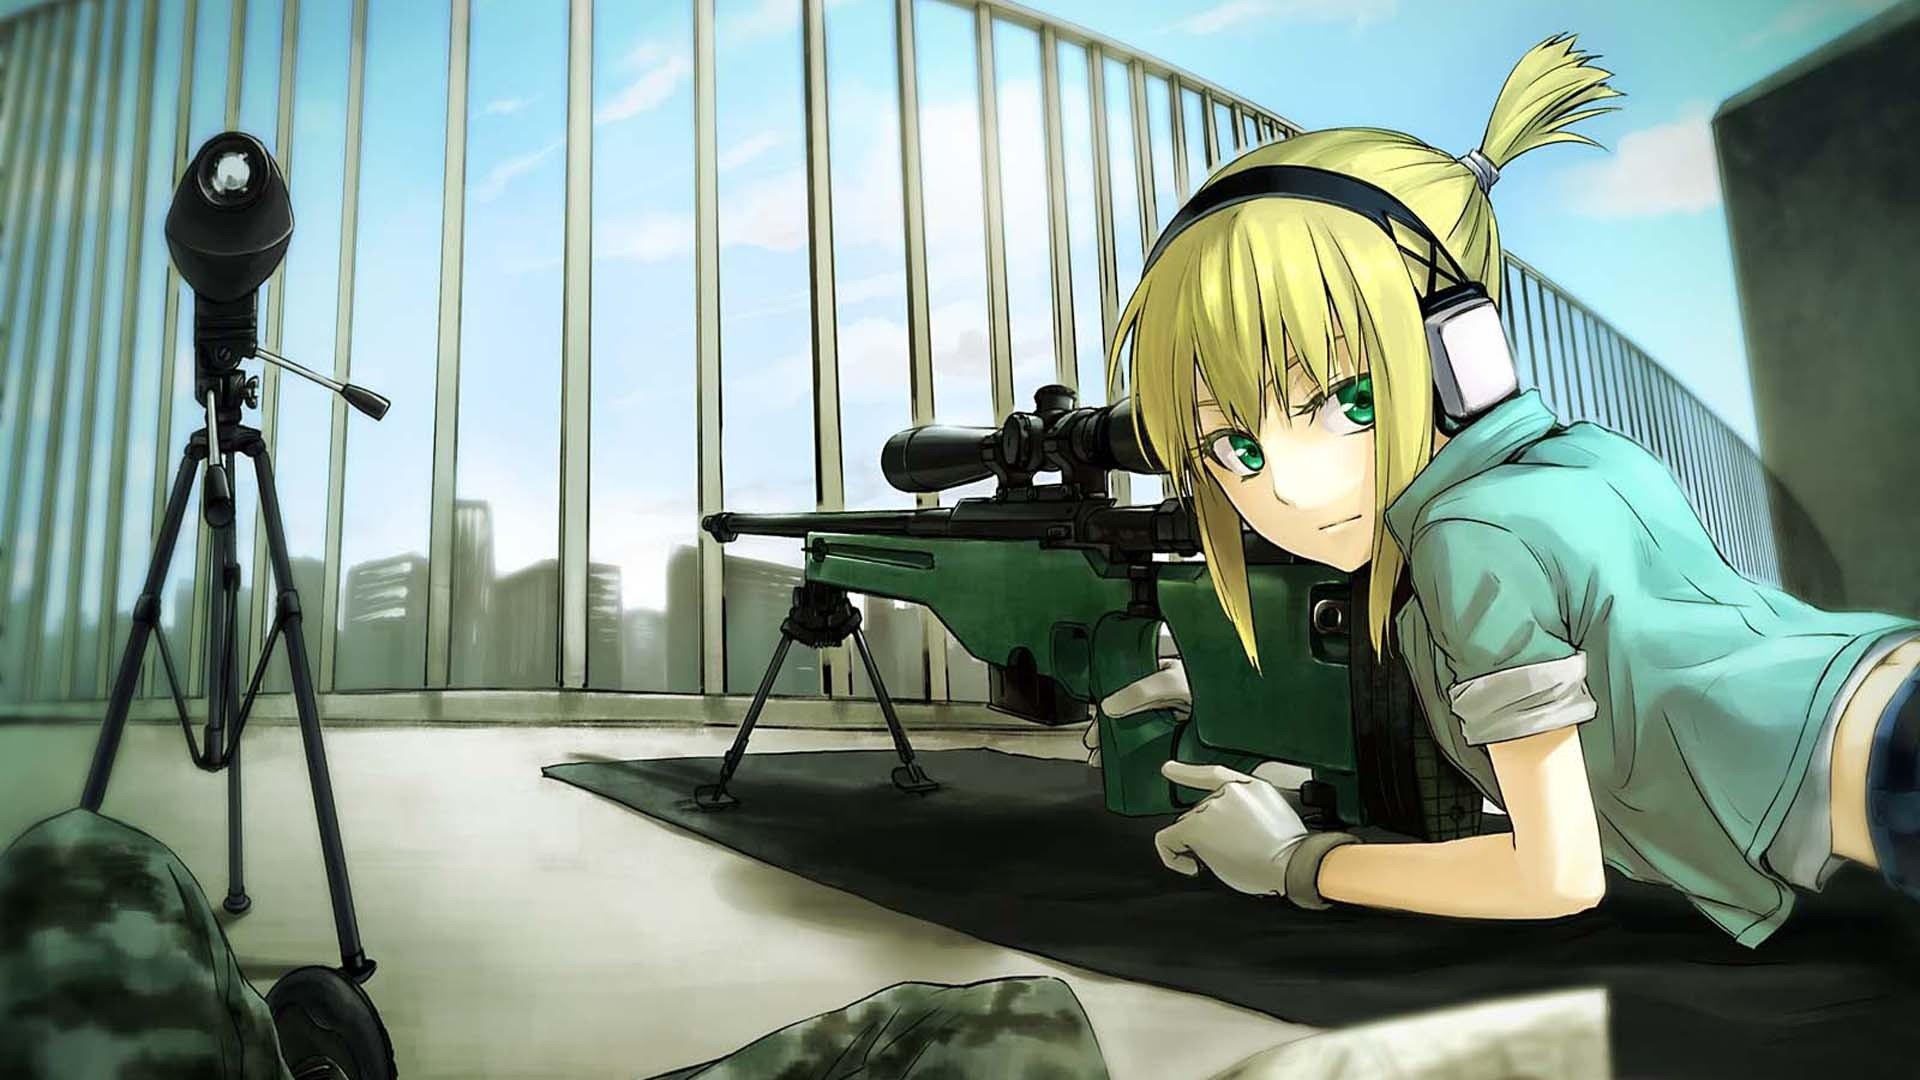 snipers, Sniper rifle, Iris (Material Sniper), Anime girls Wallpaper HD / Desktop and Mobile Background